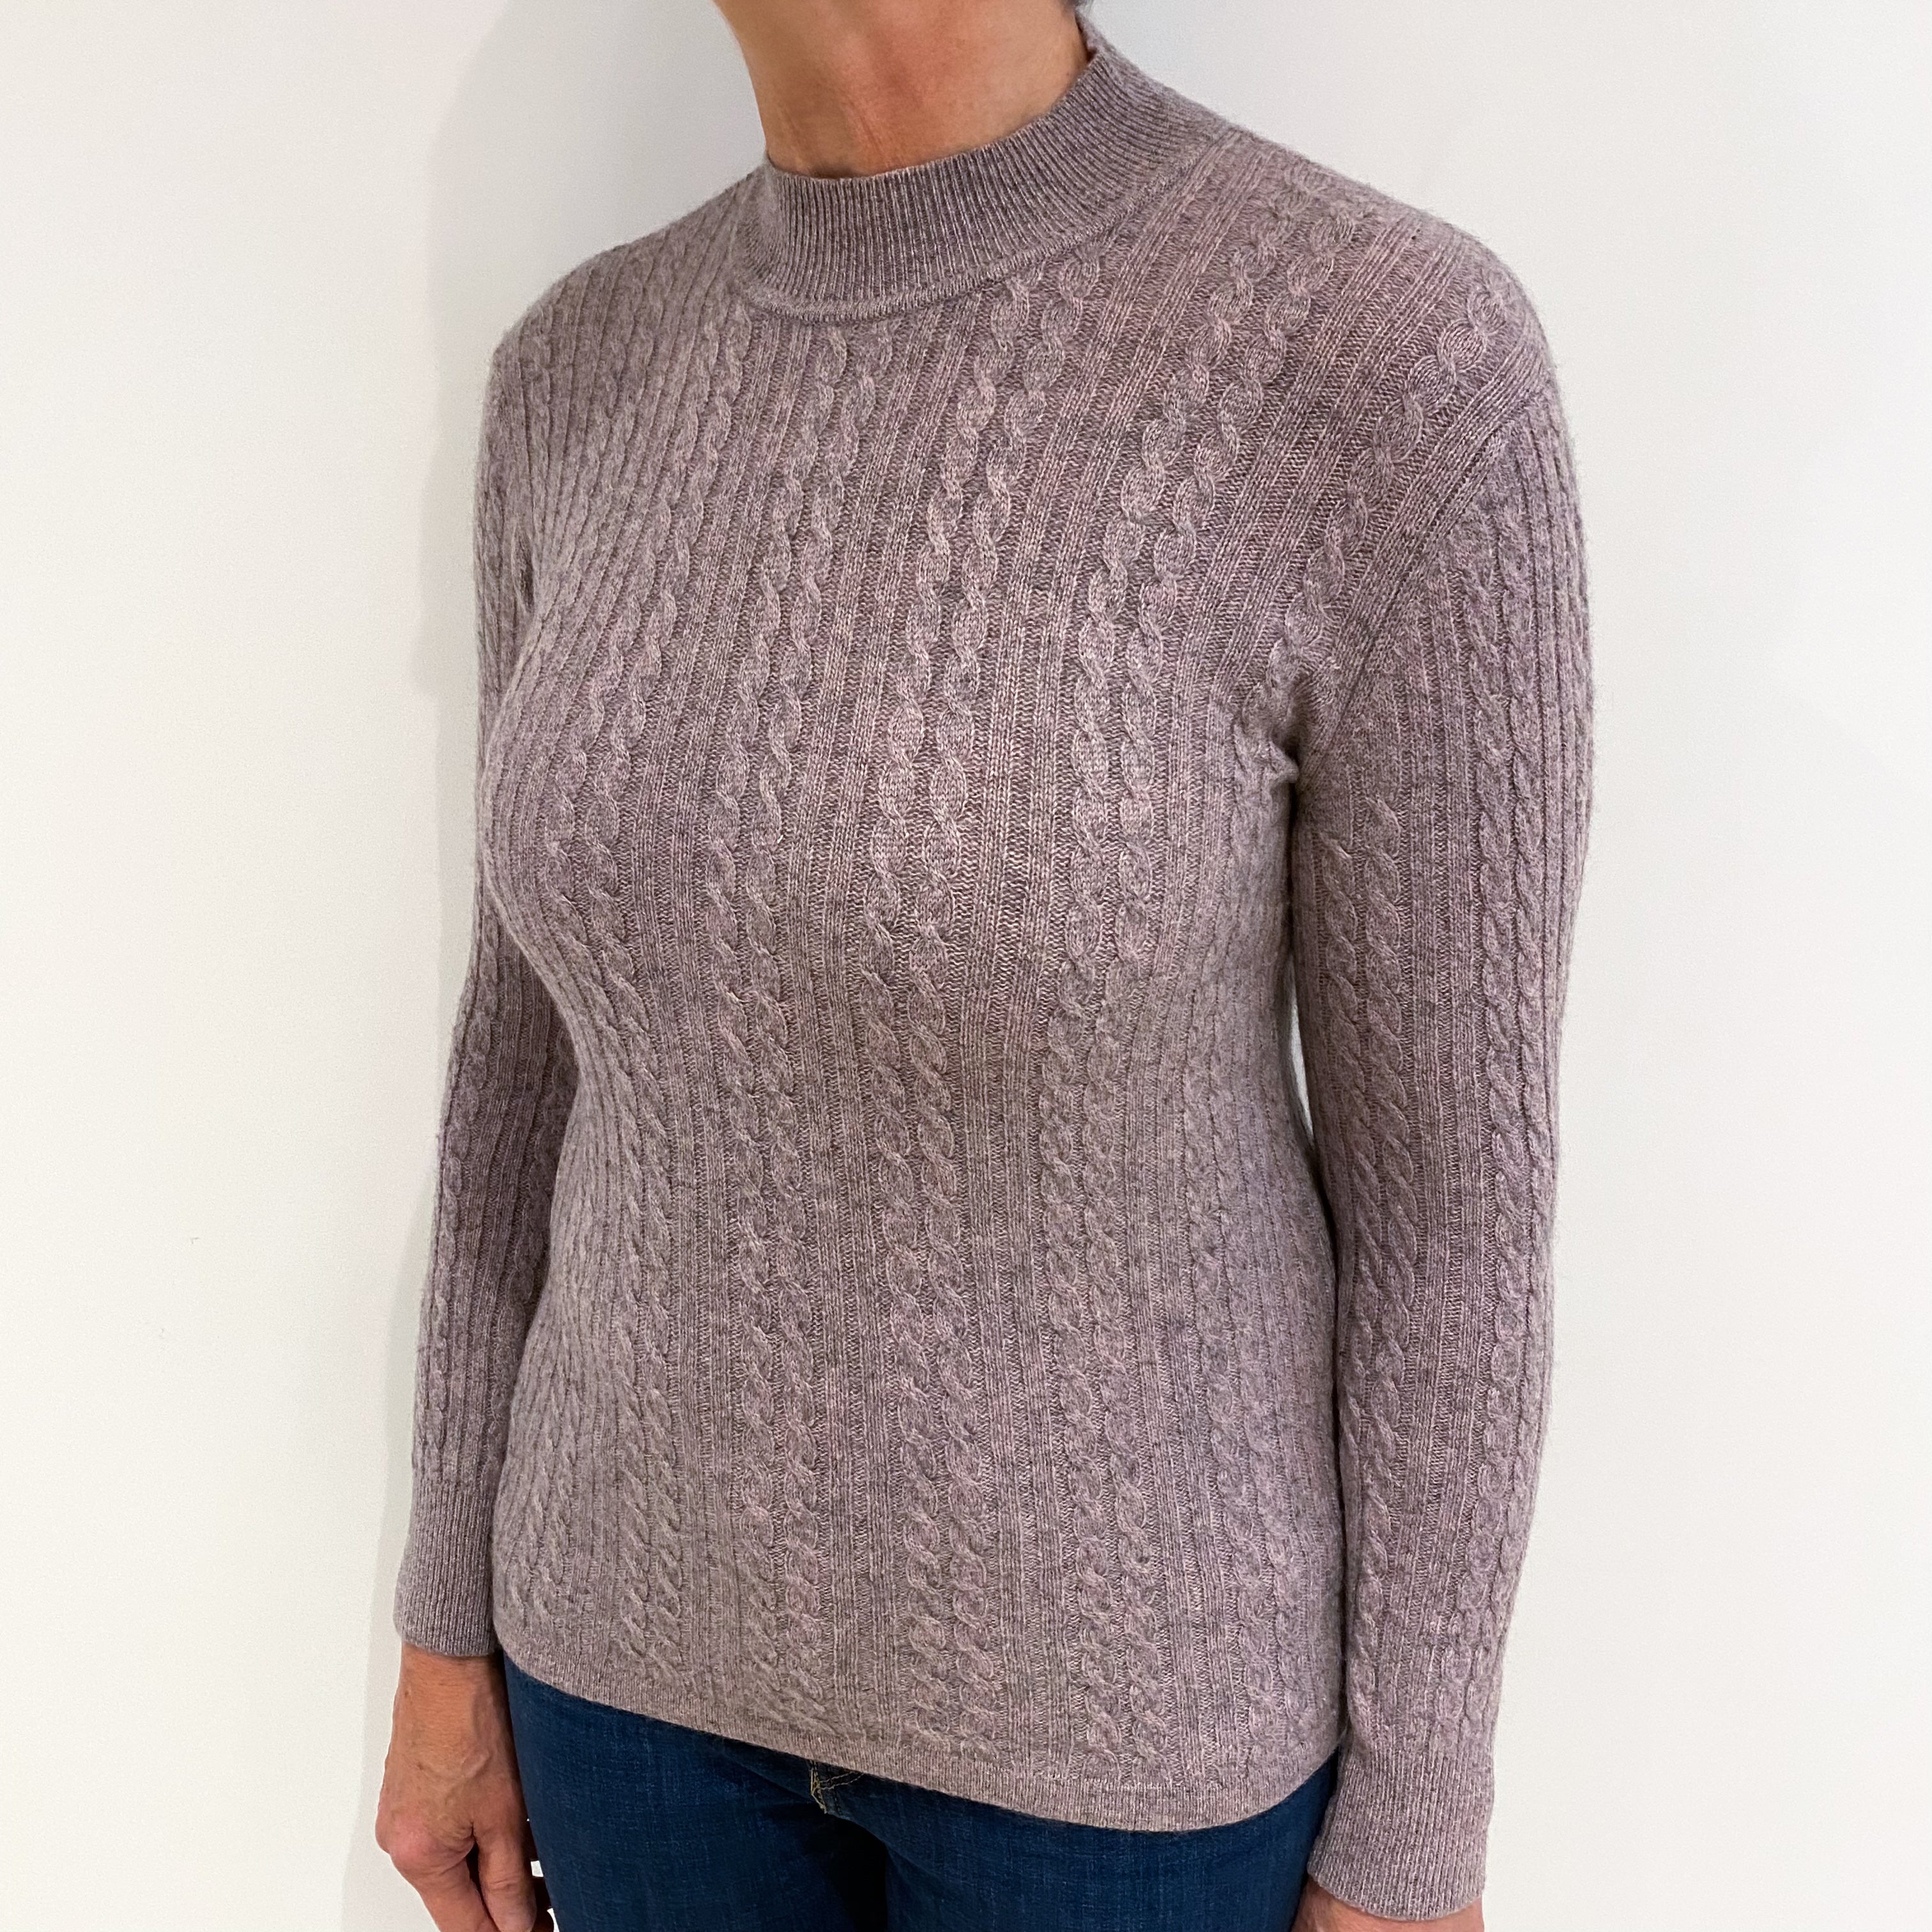 Lilac and Grey Marl Cashmere Turtle Neck Jumper Medium